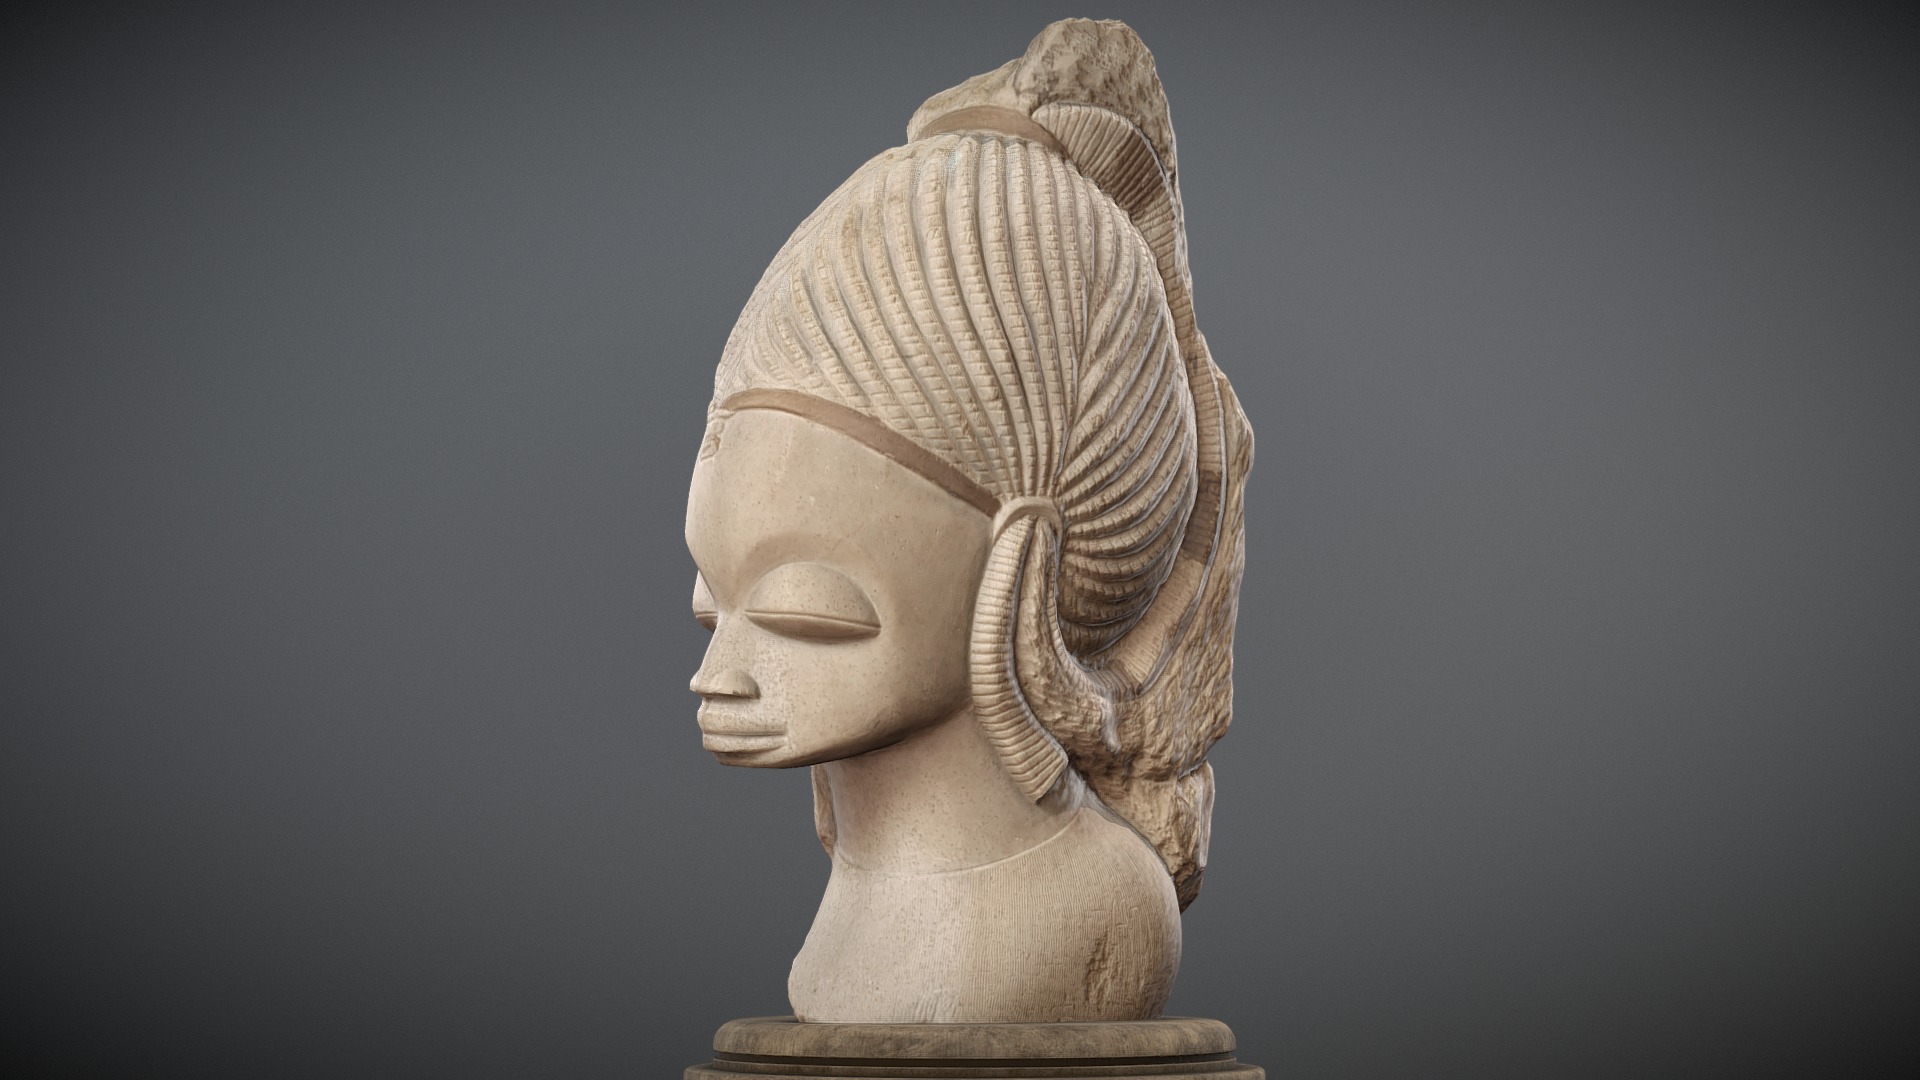 3D model M’Bigou Head – African sculpture - This is a 3D model of the M'Bigou Head - African sculpture. The 3D model is about a stone head of a person.